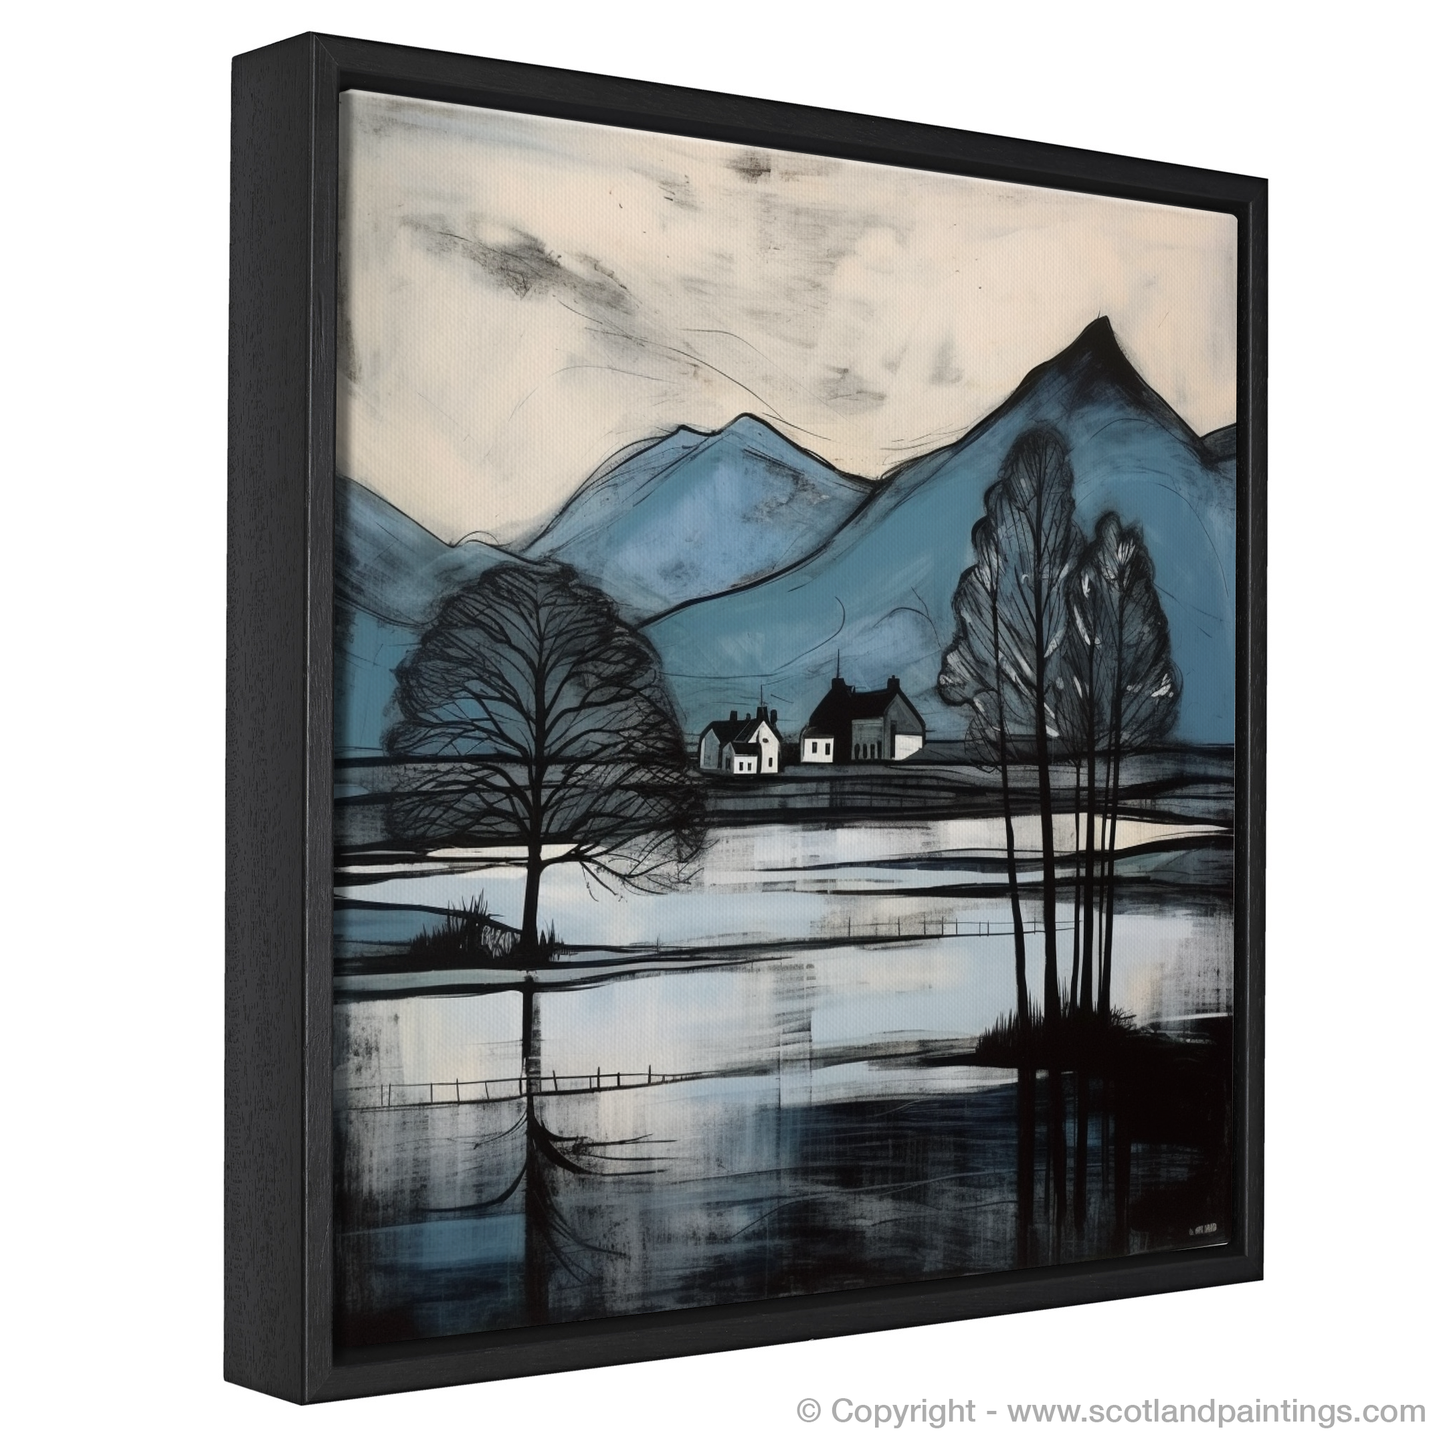 Painting and Art Print of Loch Awe, Argyll and Bute entitled "Majestic Serenity of Loch Awe".